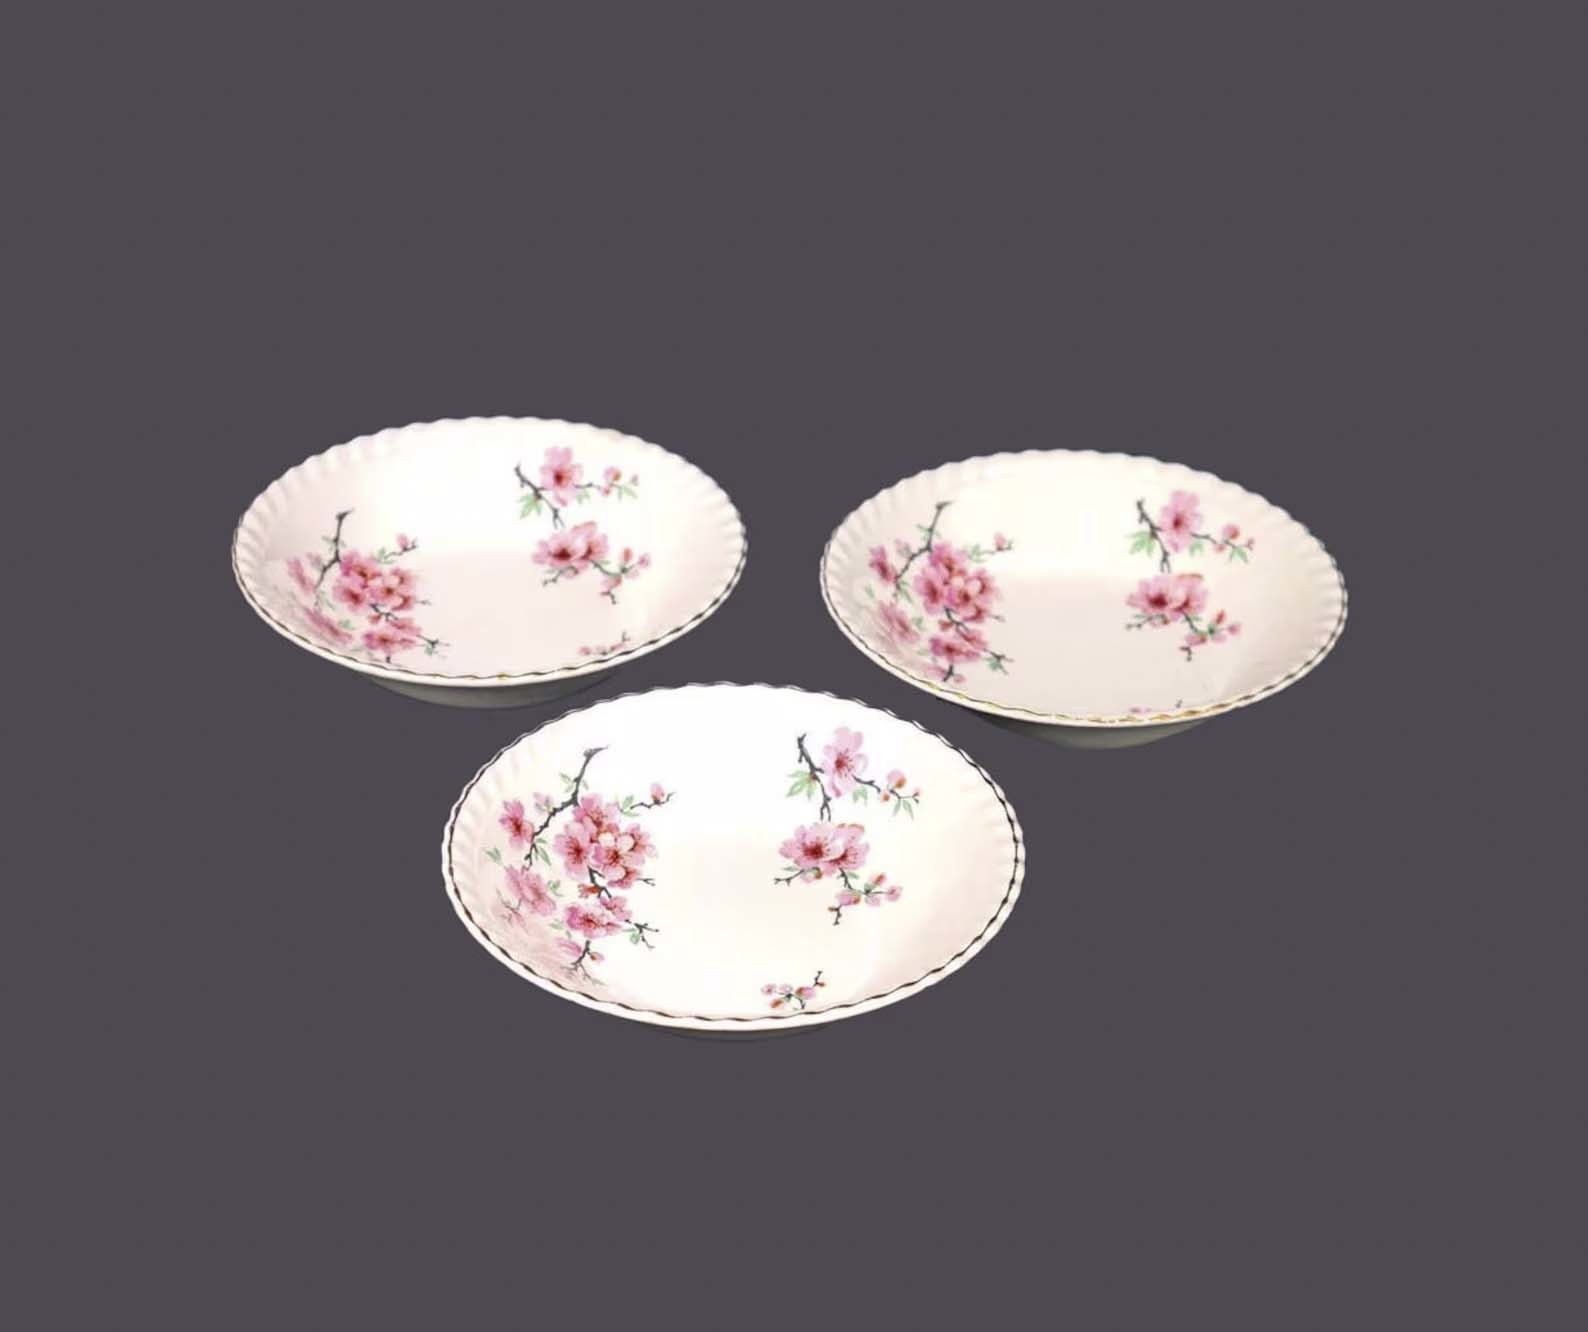 Three Johnson Brothers JB734 fruit nappies, dessert bowls made in England. Flaws - $55.00